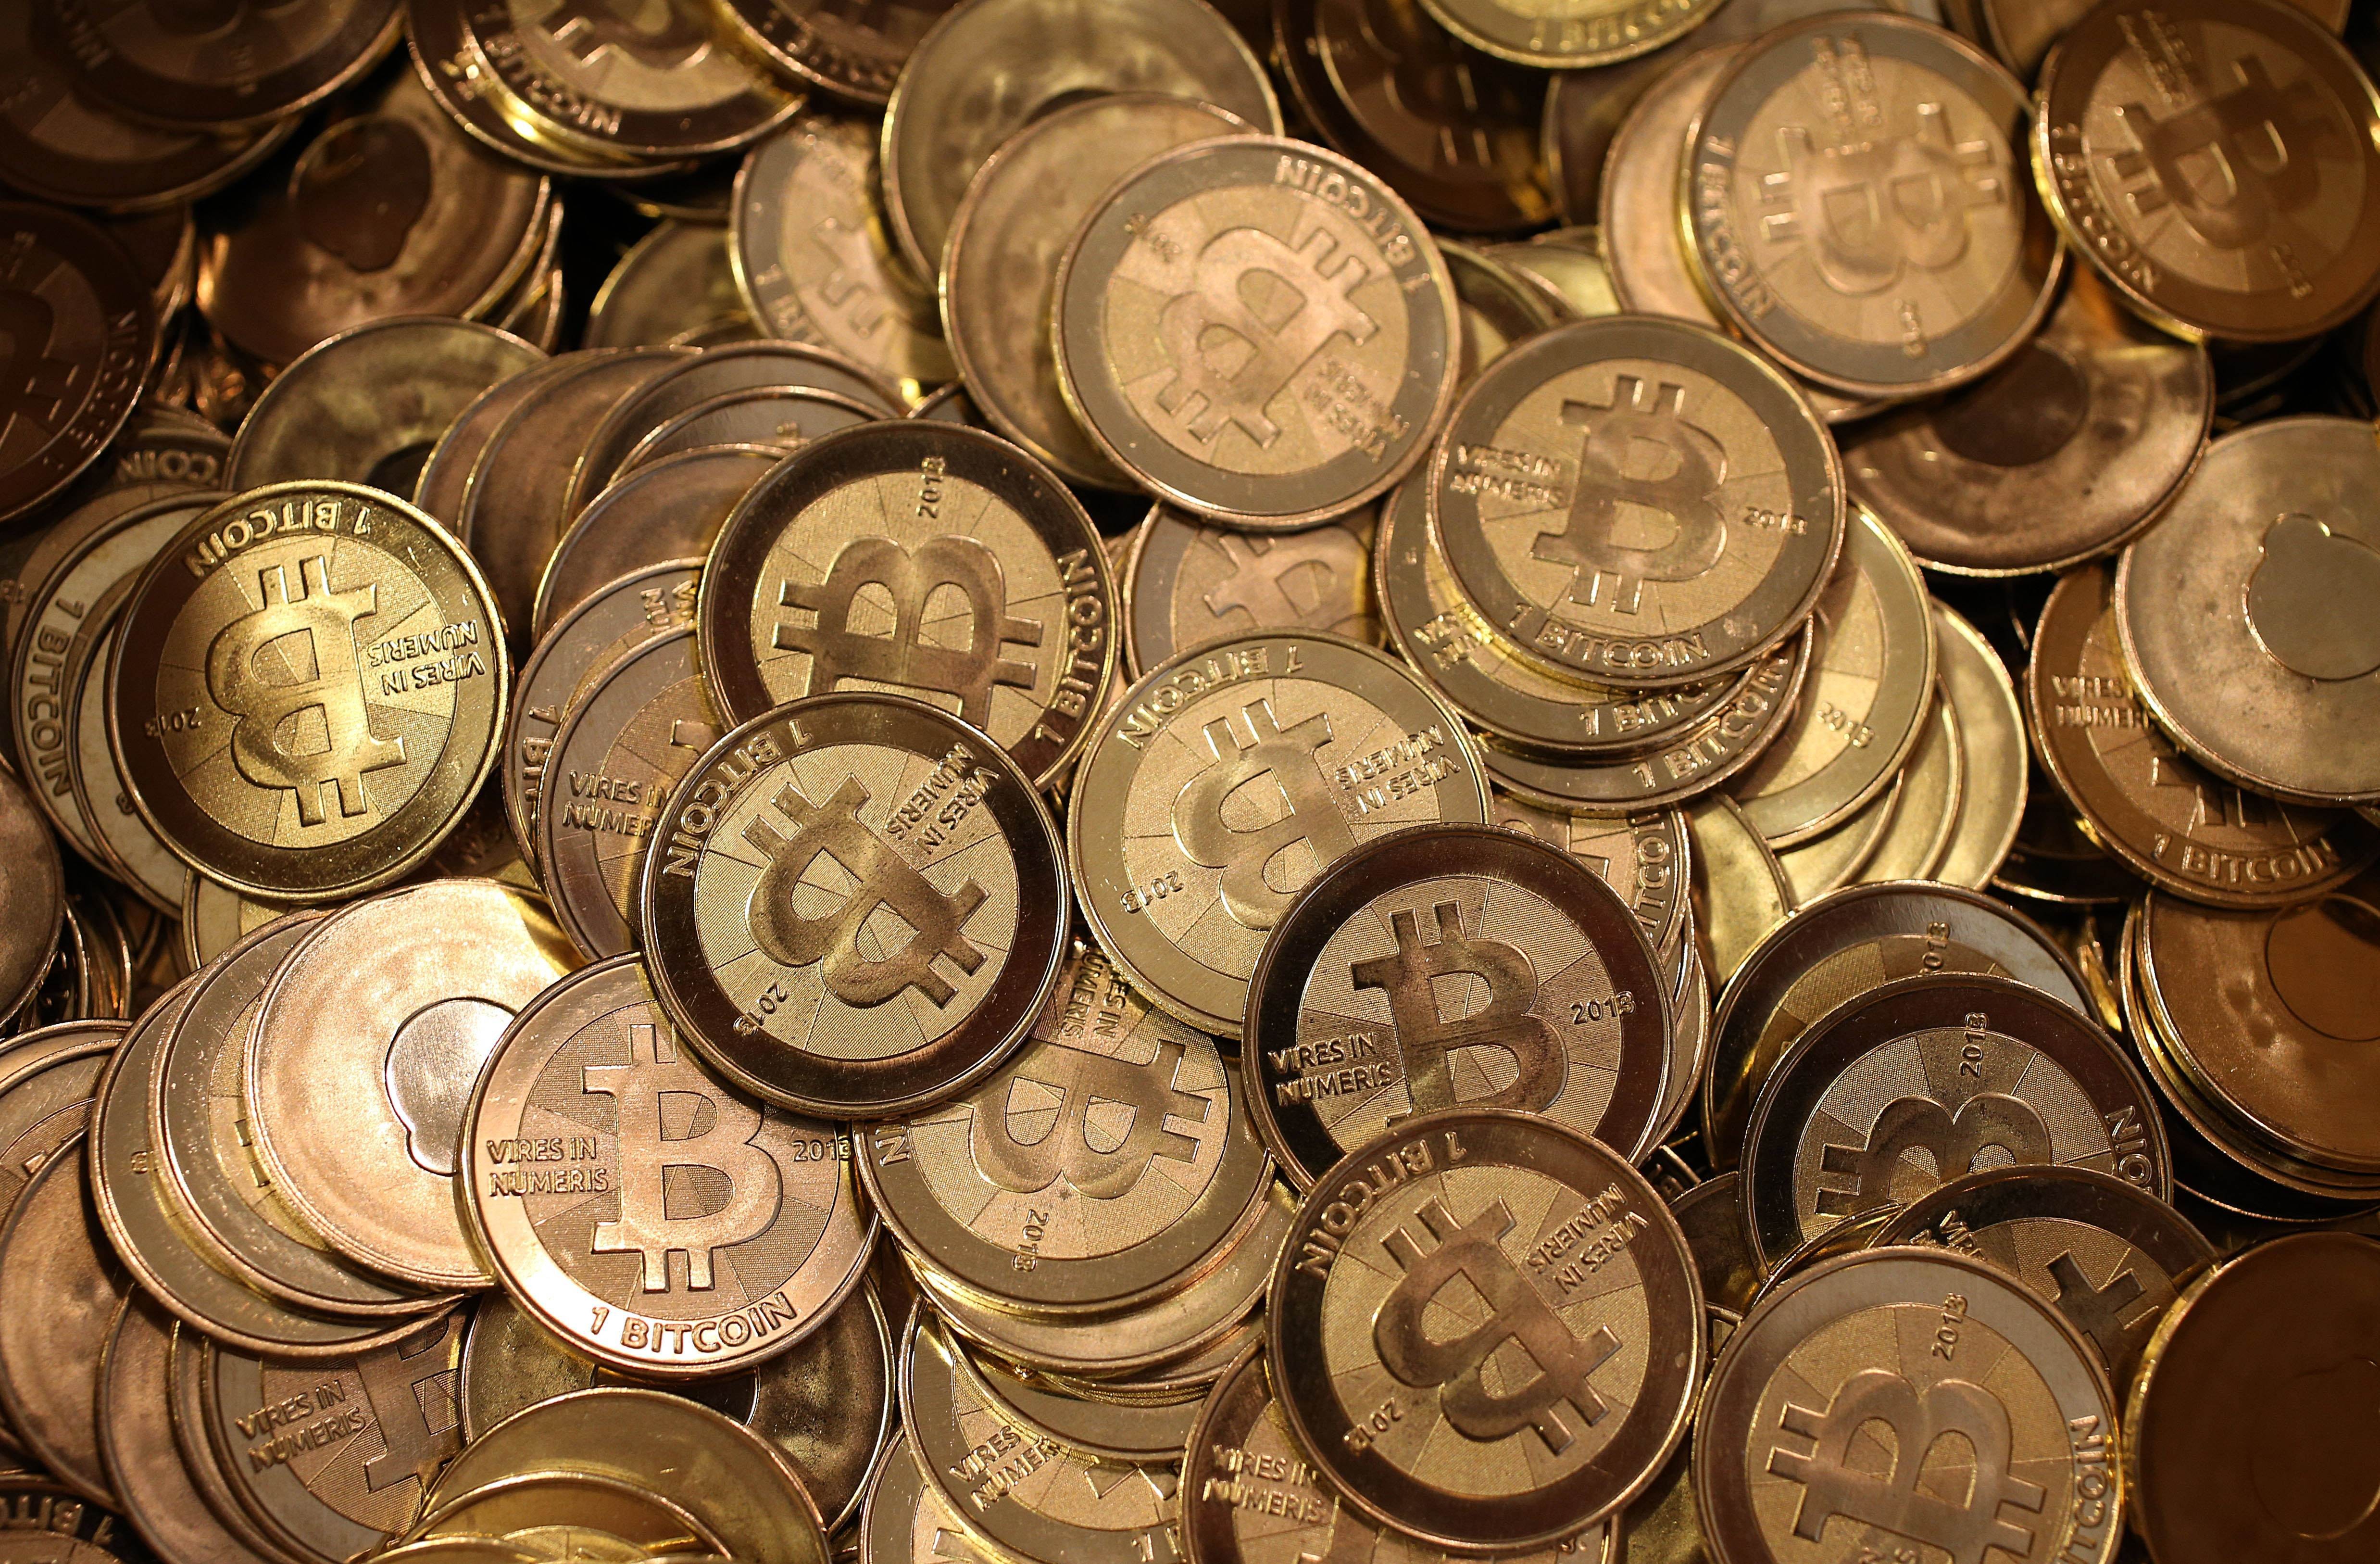 Silk Road, an online black market where illegal drugs and other goods were sold using the cryptocurrency bitcoin, was shut down in October 2013. Photo: Getty Images/AFP